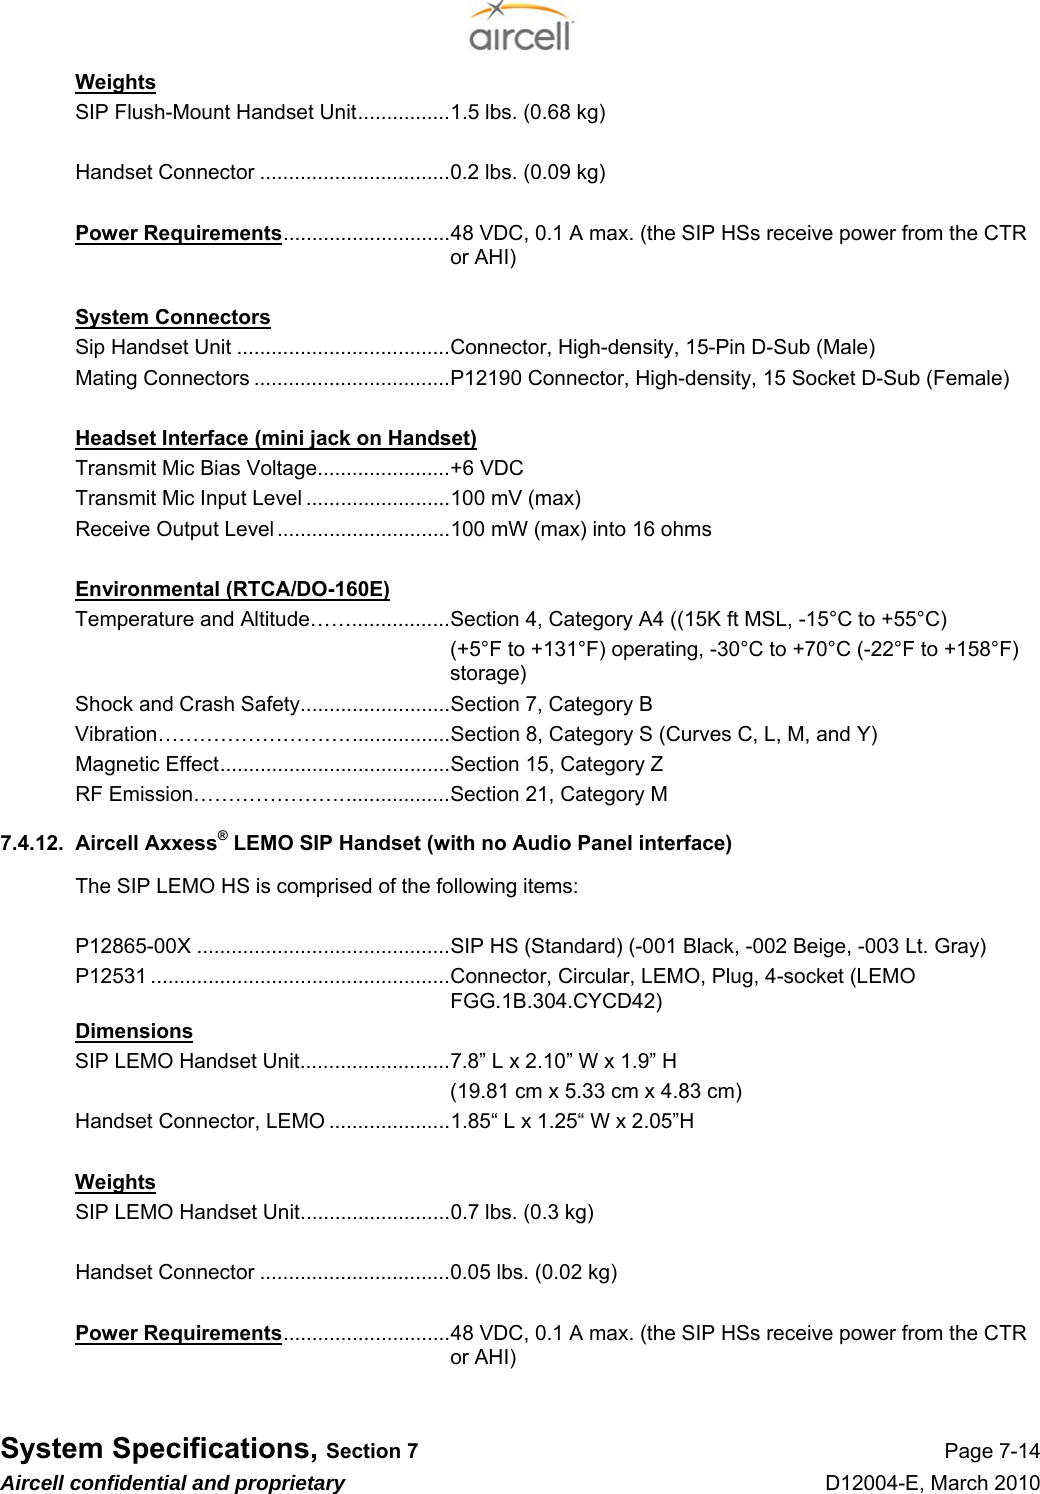  System Specifications, Section 7 Page 7-14 Aircell confidential and proprietary D12004-E, March 2010 Weights SIP Flush-Mount Handset Unit................1.5 lbs. (0.68 kg)  Handset Connector .................................0.2 lbs. (0.09 kg)  Power Requirements.............................48 VDC, 0.1 A max. (the SIP HSs receive power from the CTR or AHI)  System Connectors Sip Handset Unit .....................................Connector, High-density, 15-Pin D-Sub (Male) Mating Connectors ..................................P12190 Connector, High-density, 15 Socket D-Sub (Female)  Headset Interface (mini jack on Handset) Transmit Mic Bias Voltage.......................+6 VDC Transmit Mic Input Level .........................100 mV (max) Receive Output Level ..............................100 mW (max) into 16 ohms  Environmental (RTCA/DO-160E) Temperature and Altitude…….................Section 4, Category A4 ((15K ft MSL, -15°C to +55°C) (+5°F to +131°F) operating, -30°C to +70°C (-22°F to +158°F) storage) Shock and Crash Safety..........................Section 7, Category B Vibration………………………..................Section 8, Category S (Curves C, L, M, and Y) Magnetic Effect........................................Section 15, Category Z RF Emission…………………...................Section 21, Category M 7.4.12.  Aircell Axxess® LEMO SIP Handset (with no Audio Panel interface) The SIP LEMO HS is comprised of the following items:  P12865-00X ............................................SIP HS (Standard) (-001 Black, -002 Beige, -003 Lt. Gray) P12531 ....................................................Connector, Circular, LEMO, Plug, 4-socket (LEMO FGG.1B.304.CYCD42) Dimensions SIP LEMO Handset Unit..........................7.8” L x 2.10” W x 1.9” H   (19.81 cm x 5.33 cm x 4.83 cm) Handset Connector, LEMO .....................1.85“ L x 1.25“ W x 2.05”H  Weights SIP LEMO Handset Unit..........................0.7 lbs. (0.3 kg)  Handset Connector .................................0.05 lbs. (0.02 kg)  Power Requirements.............................48 VDC, 0.1 A max. (the SIP HSs receive power from the CTR or AHI)  